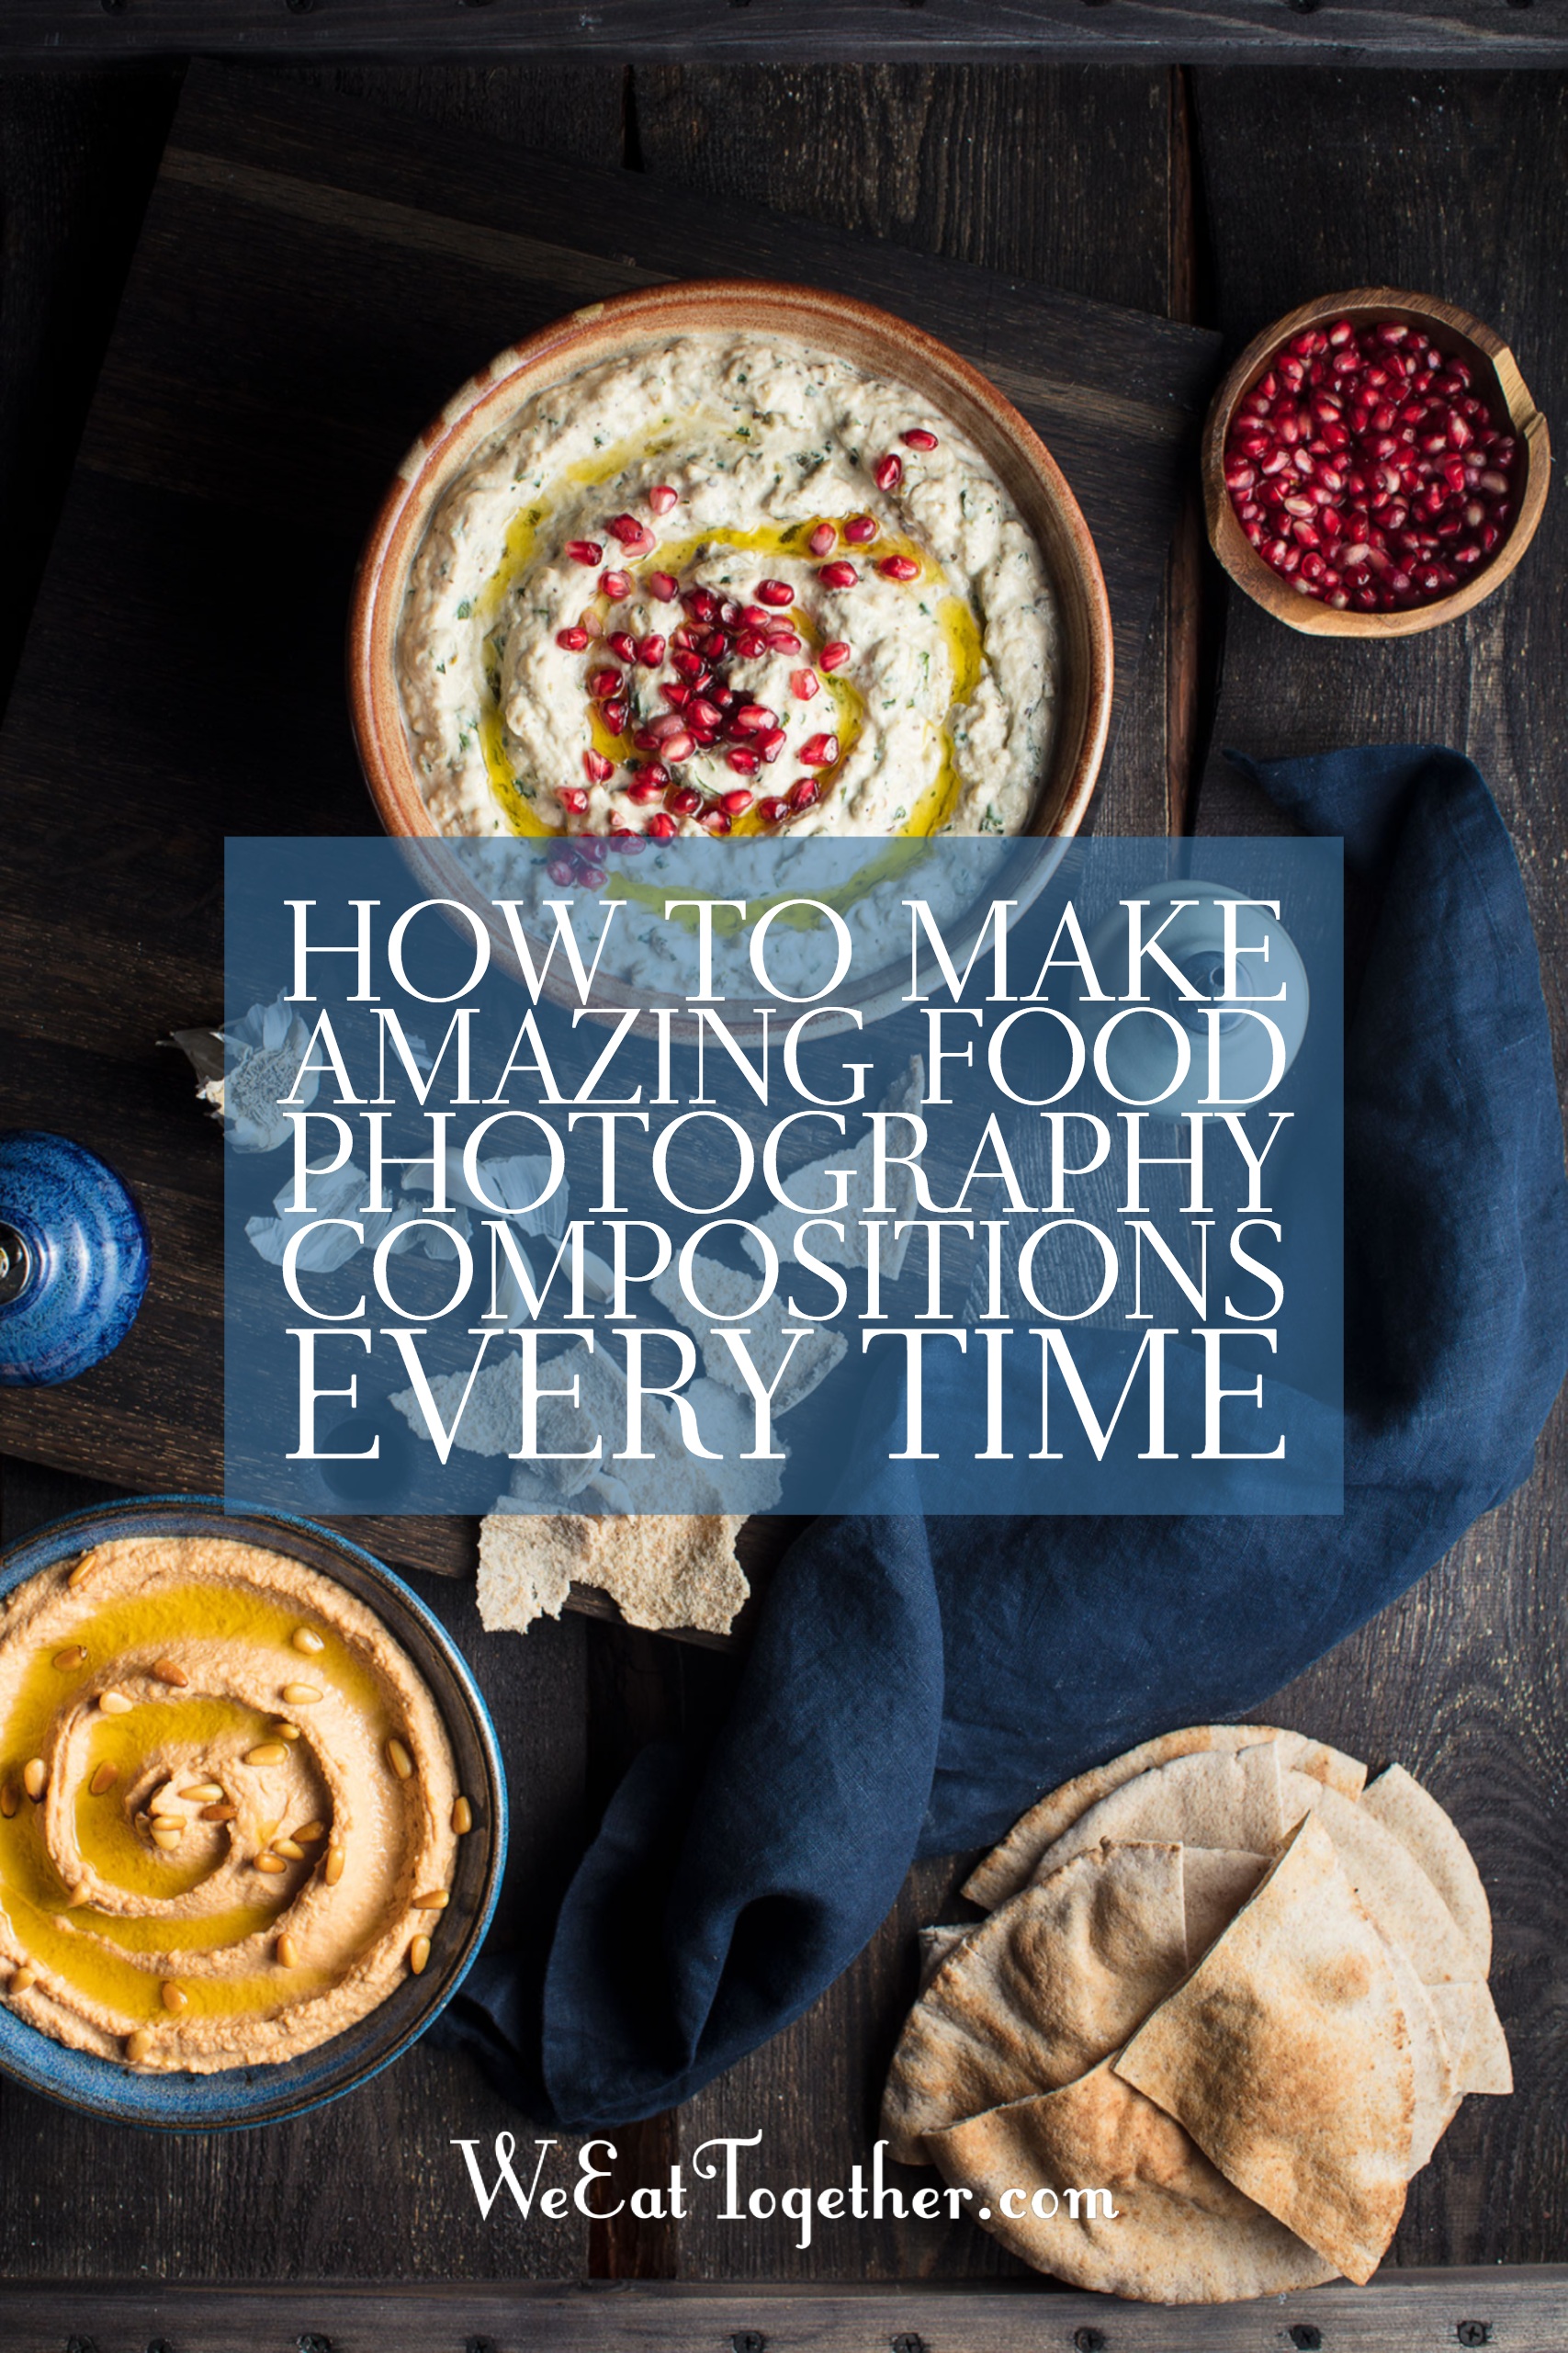 How To Make Amazing Food Photography Compositions Every Time